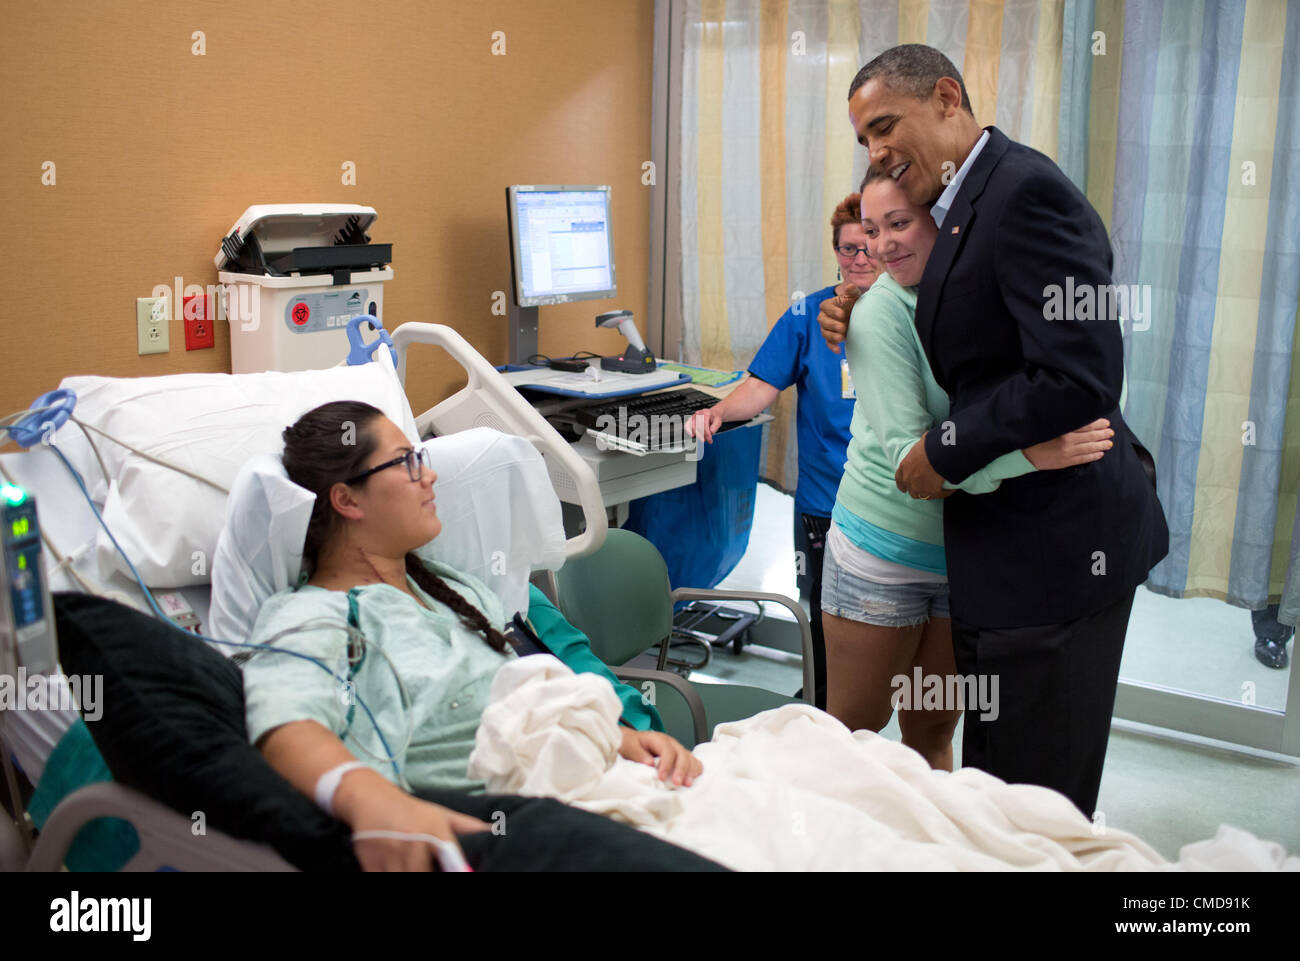 US President Barack Obama hugs Stephanie Davies, who helped keep her friend, Allie Young, left, alive after being shot during the movie theatre massacre July 22, 2012 in Aurora, Colorado. President Obama visited victims from the shooting at a mid-night showing of The Dark Knight Rises. Stock Photo